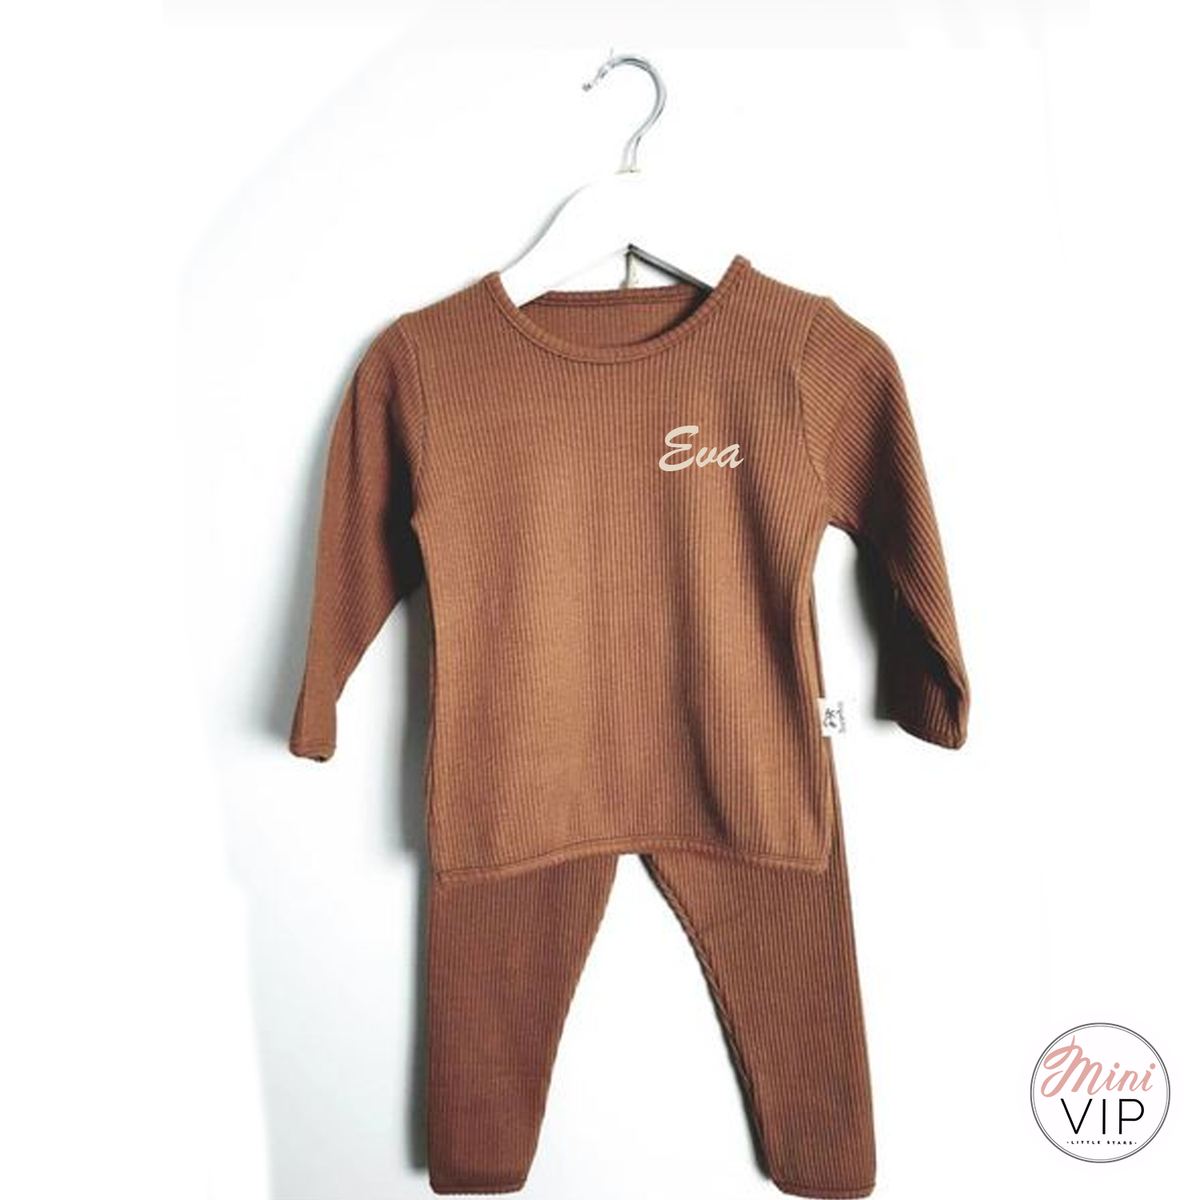 Embroidered Caramel Ribbed Loungewear